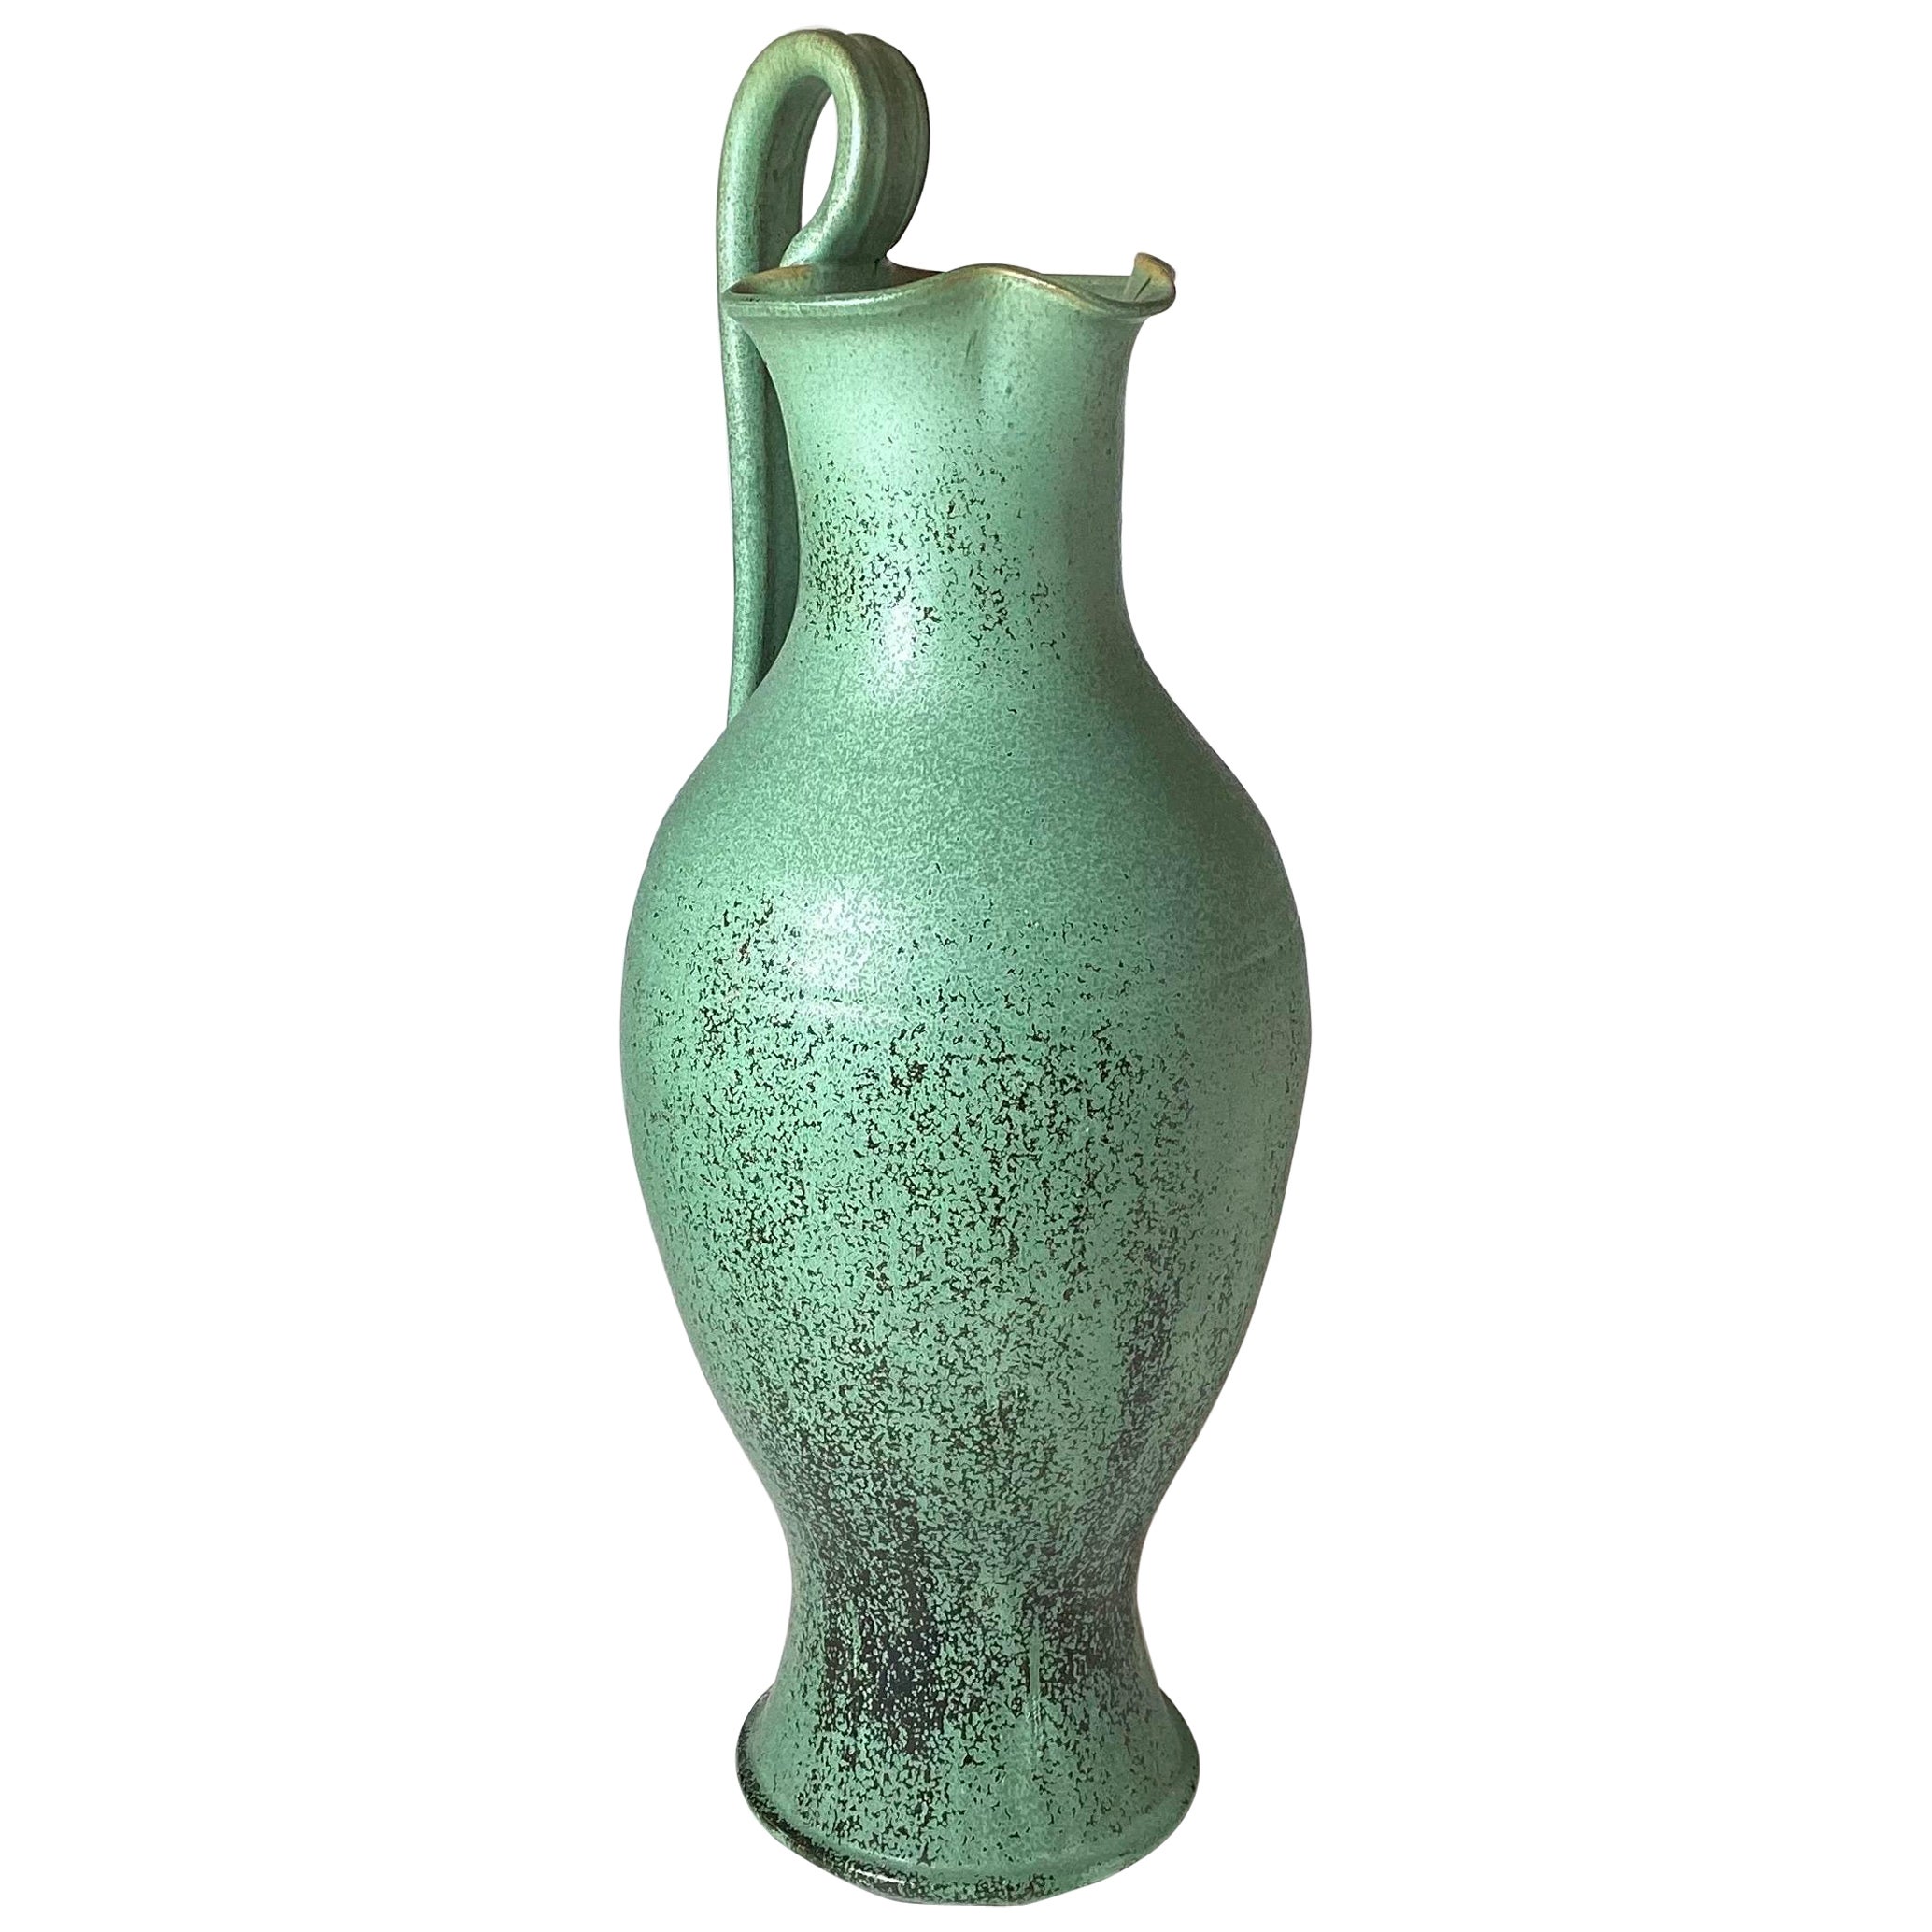 Early 20th Century Greek Style Green Ewer Pitcher